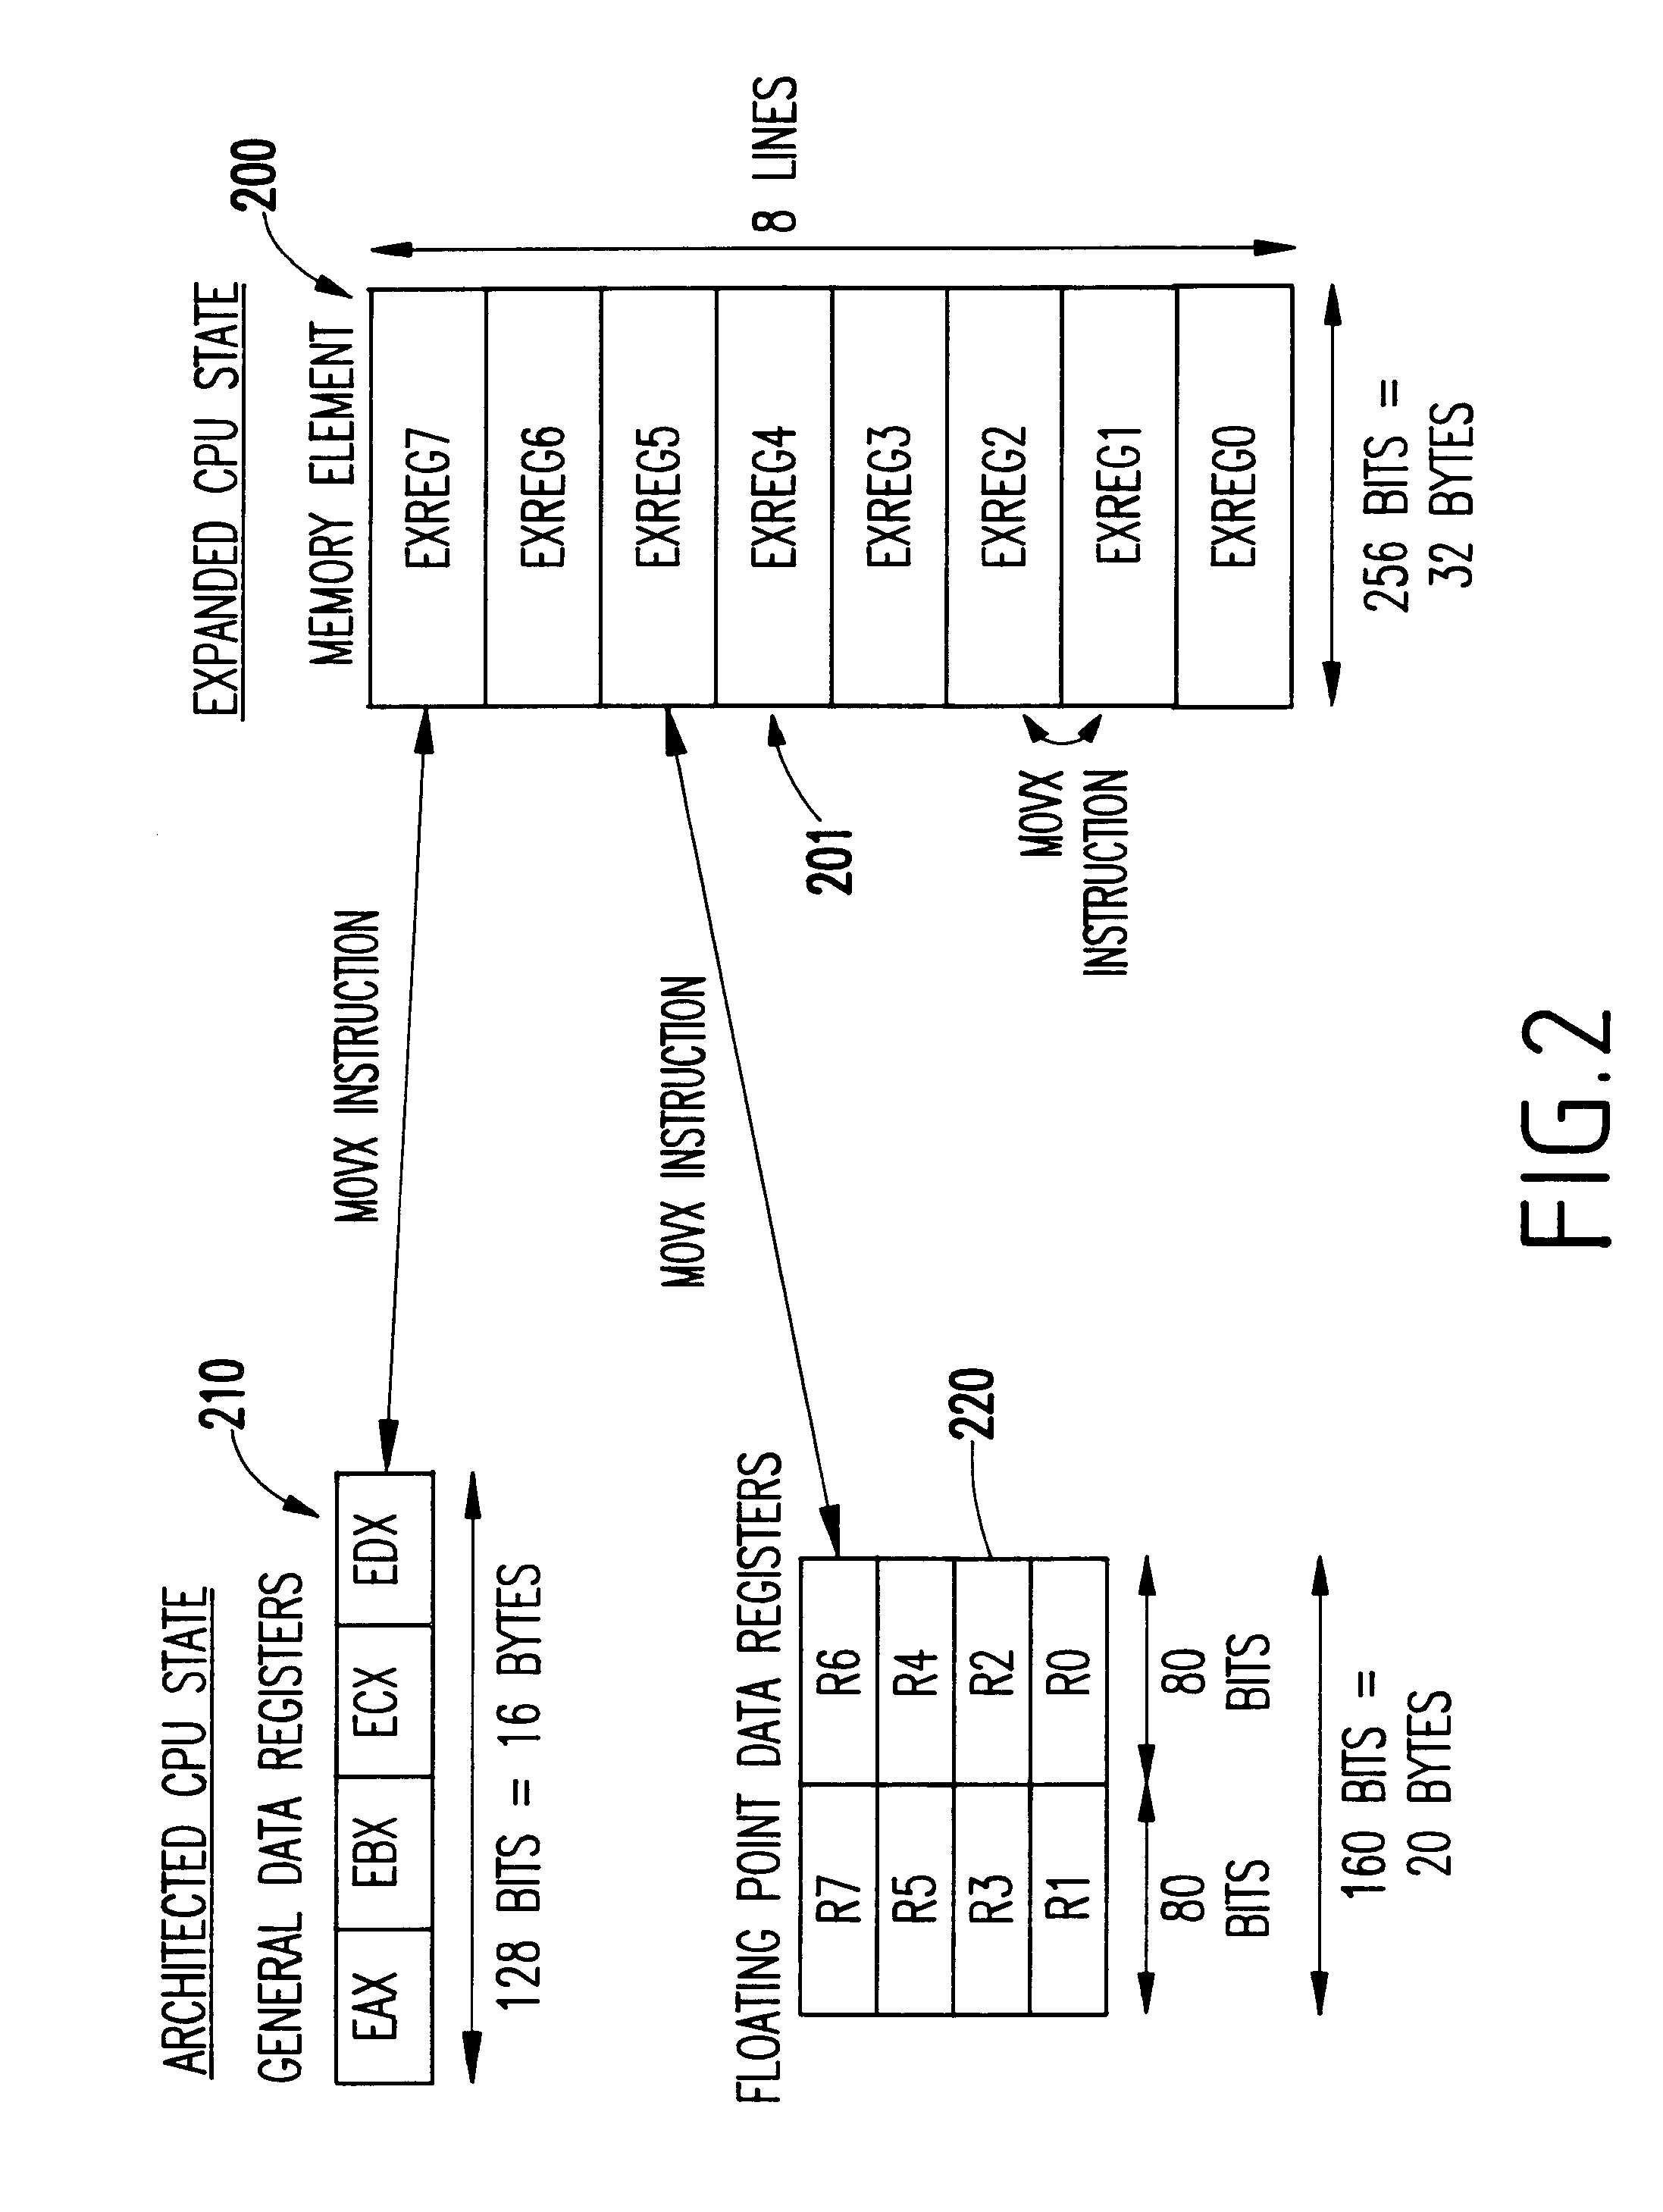 Virtual cache registers with selectable width for accommodating different precision data formats